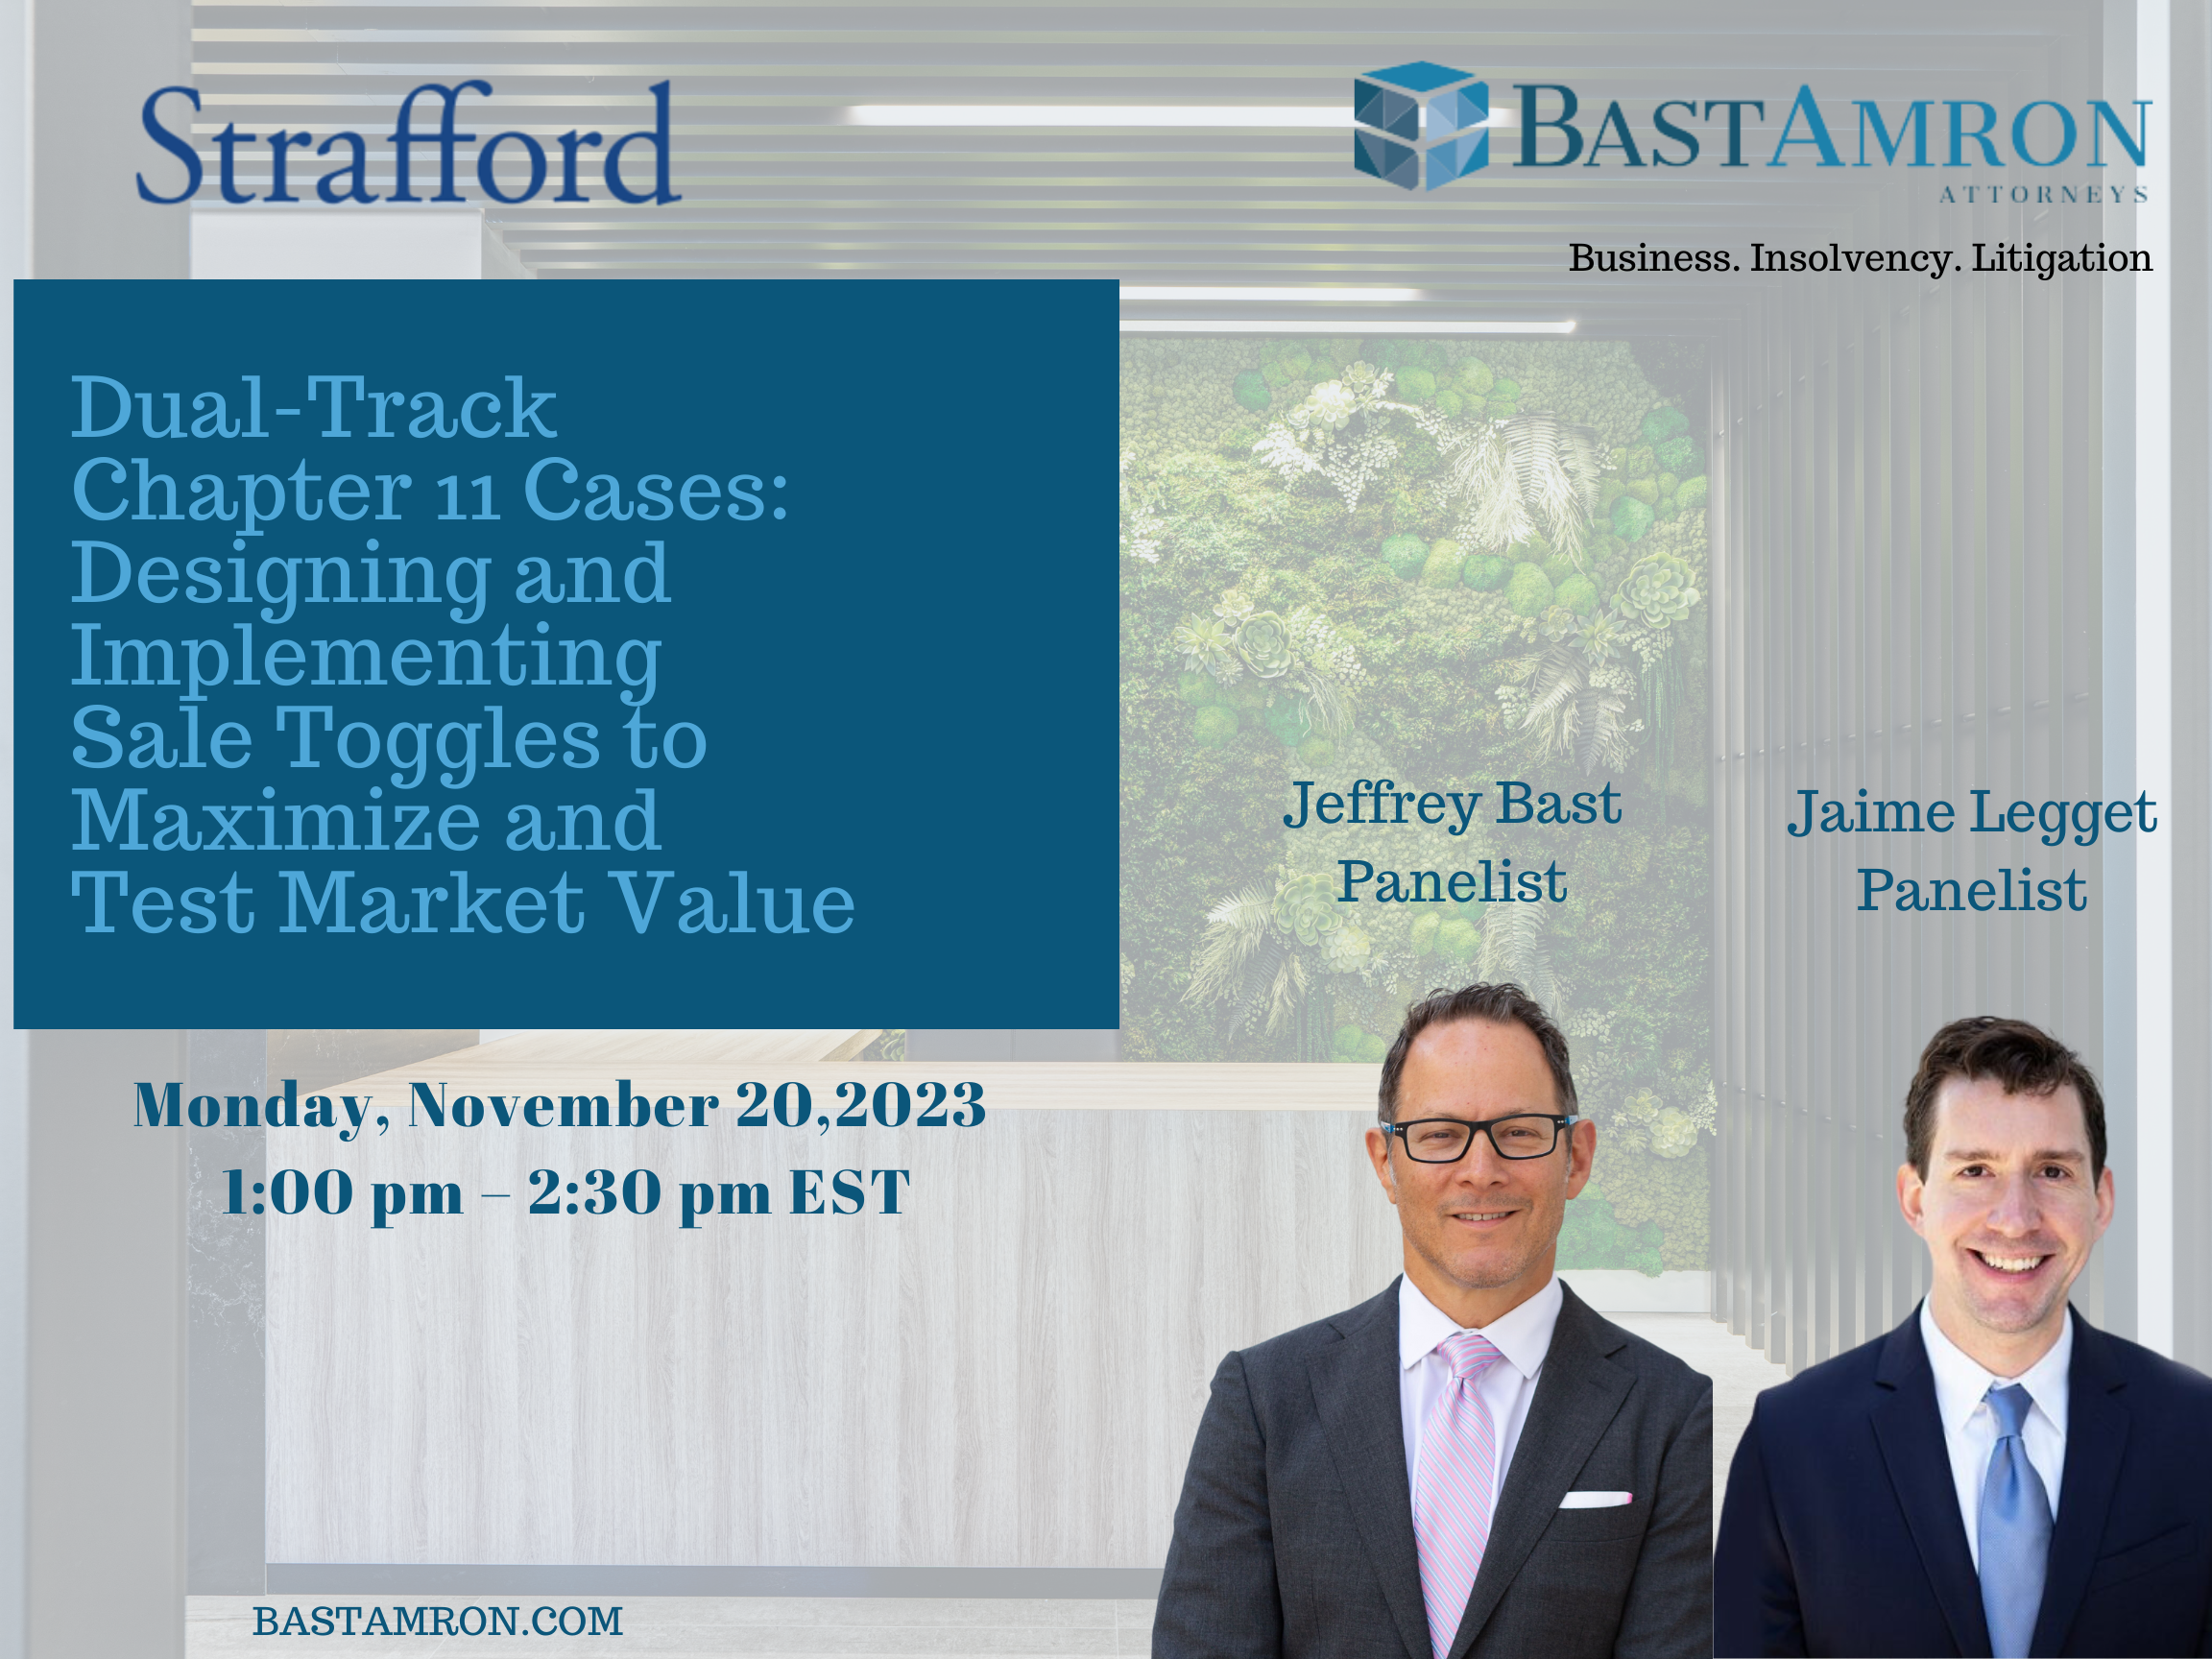 BAST AMRON ATTORNEYS PRESENT ON WEBINAR “DUAL-TRACK CHAPTER 11 CASES: DESIGNING AND IMPLEMENTING SALE TOGGLES TO MAXIMIZE AND TEST MARKET VALUE” HOSTED BY STRAFFORD